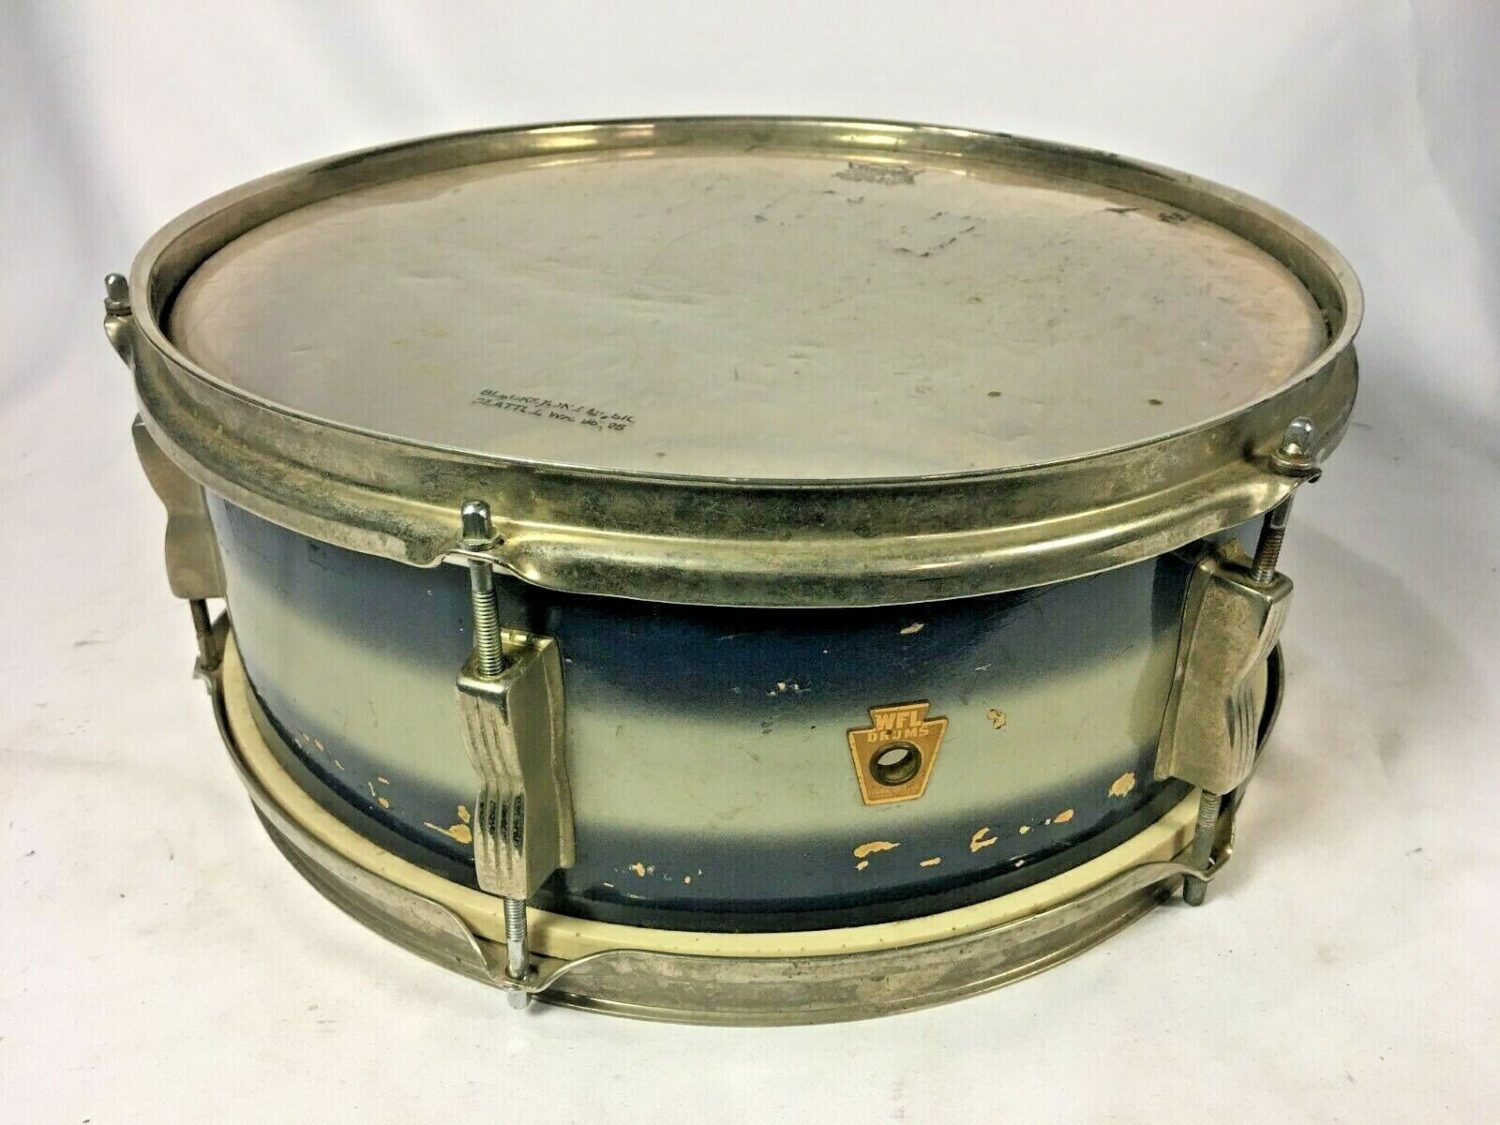 WFL Ludwig 6-Lug Snare Drum 5 1/2″ x 14″ Blue and Silver 40s-50s Classic 490 Vintage William F. Ludwig Badge